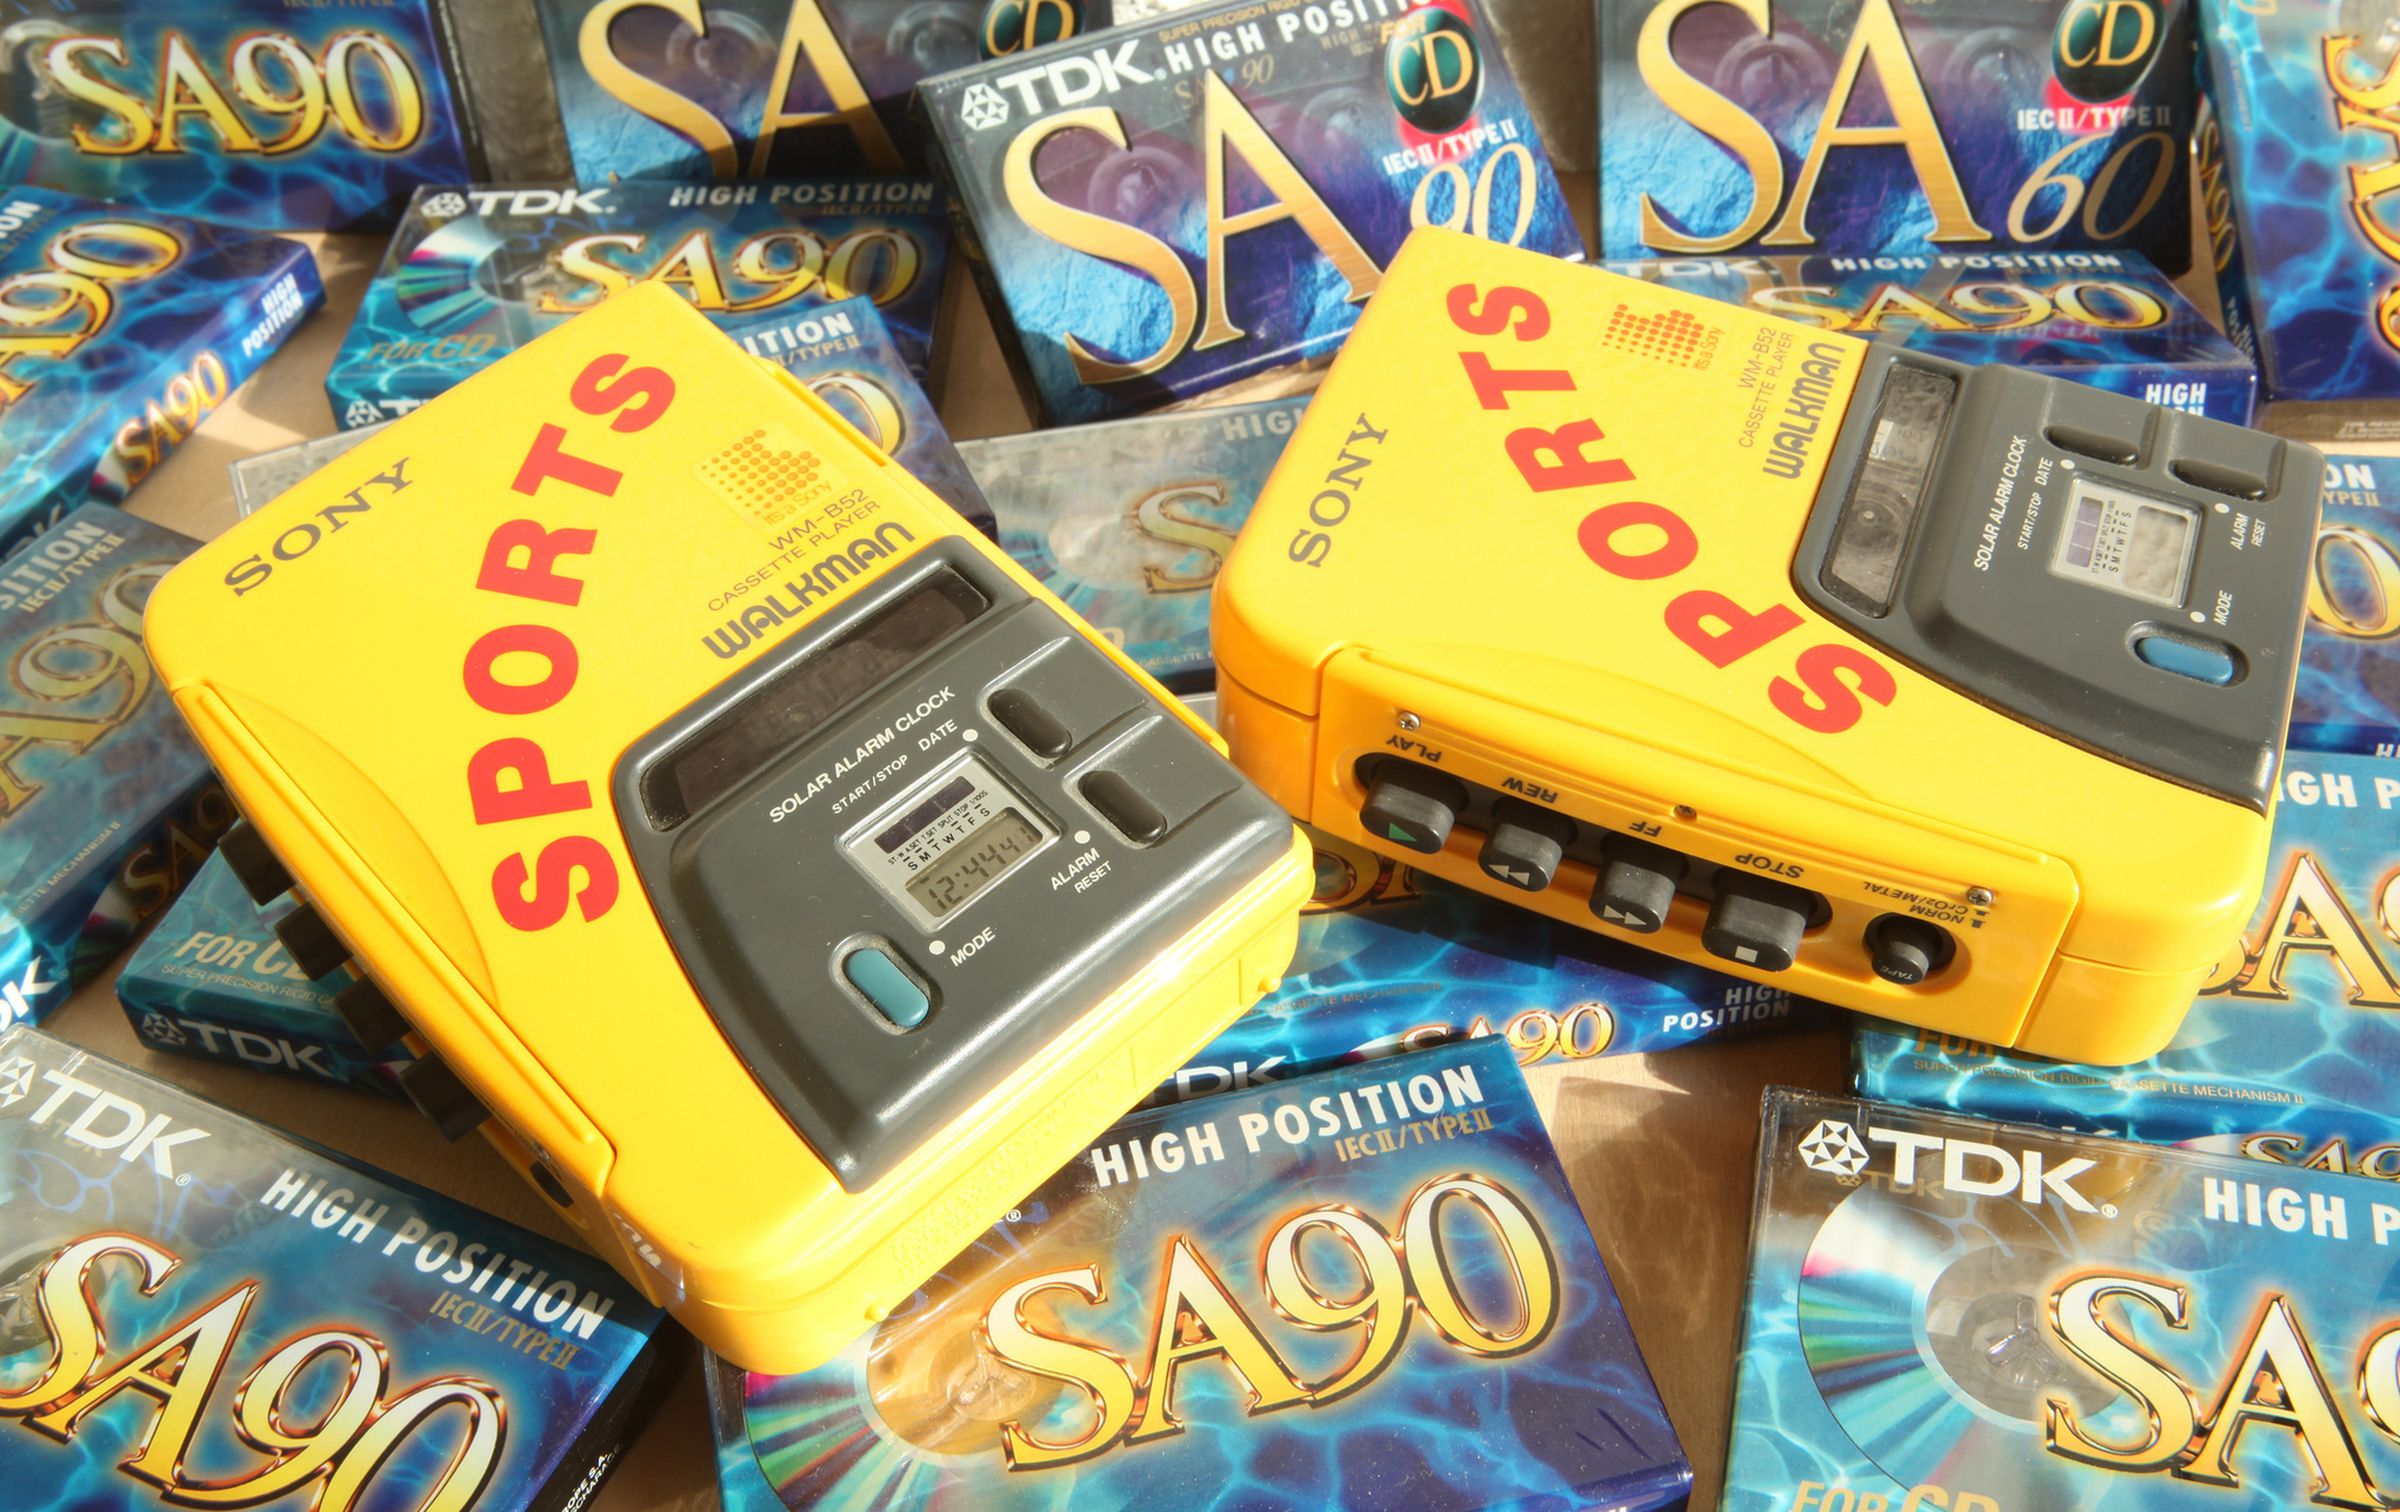 Sony Walkman: music to your ears, through the years